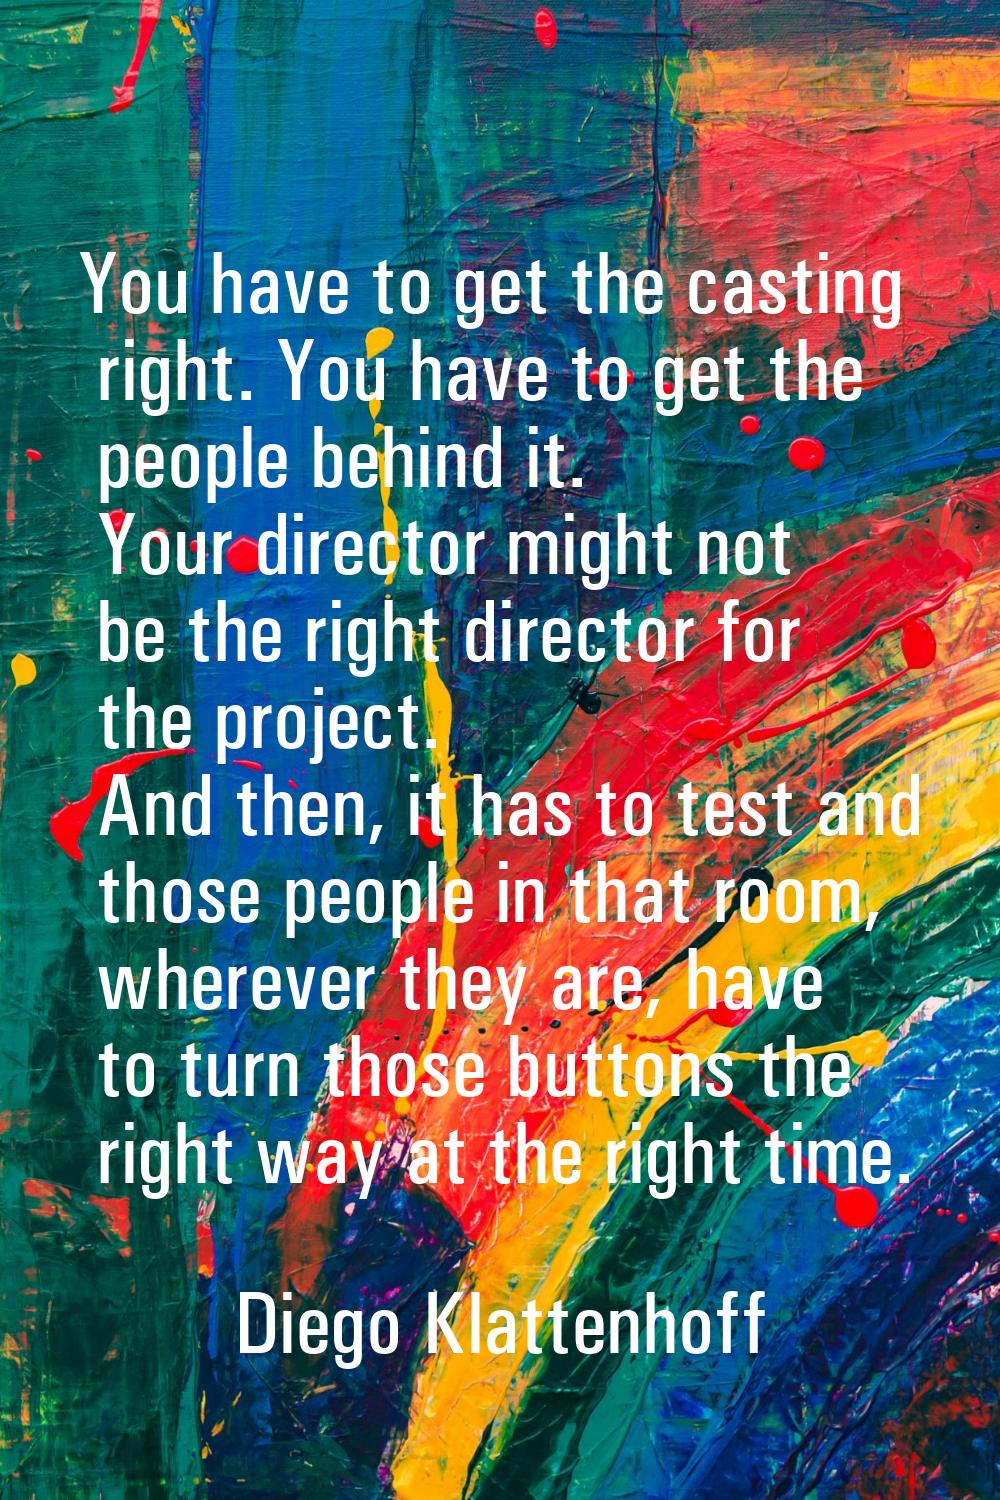 You have to get the casting right. You have to get the people behind it. Your director might not be